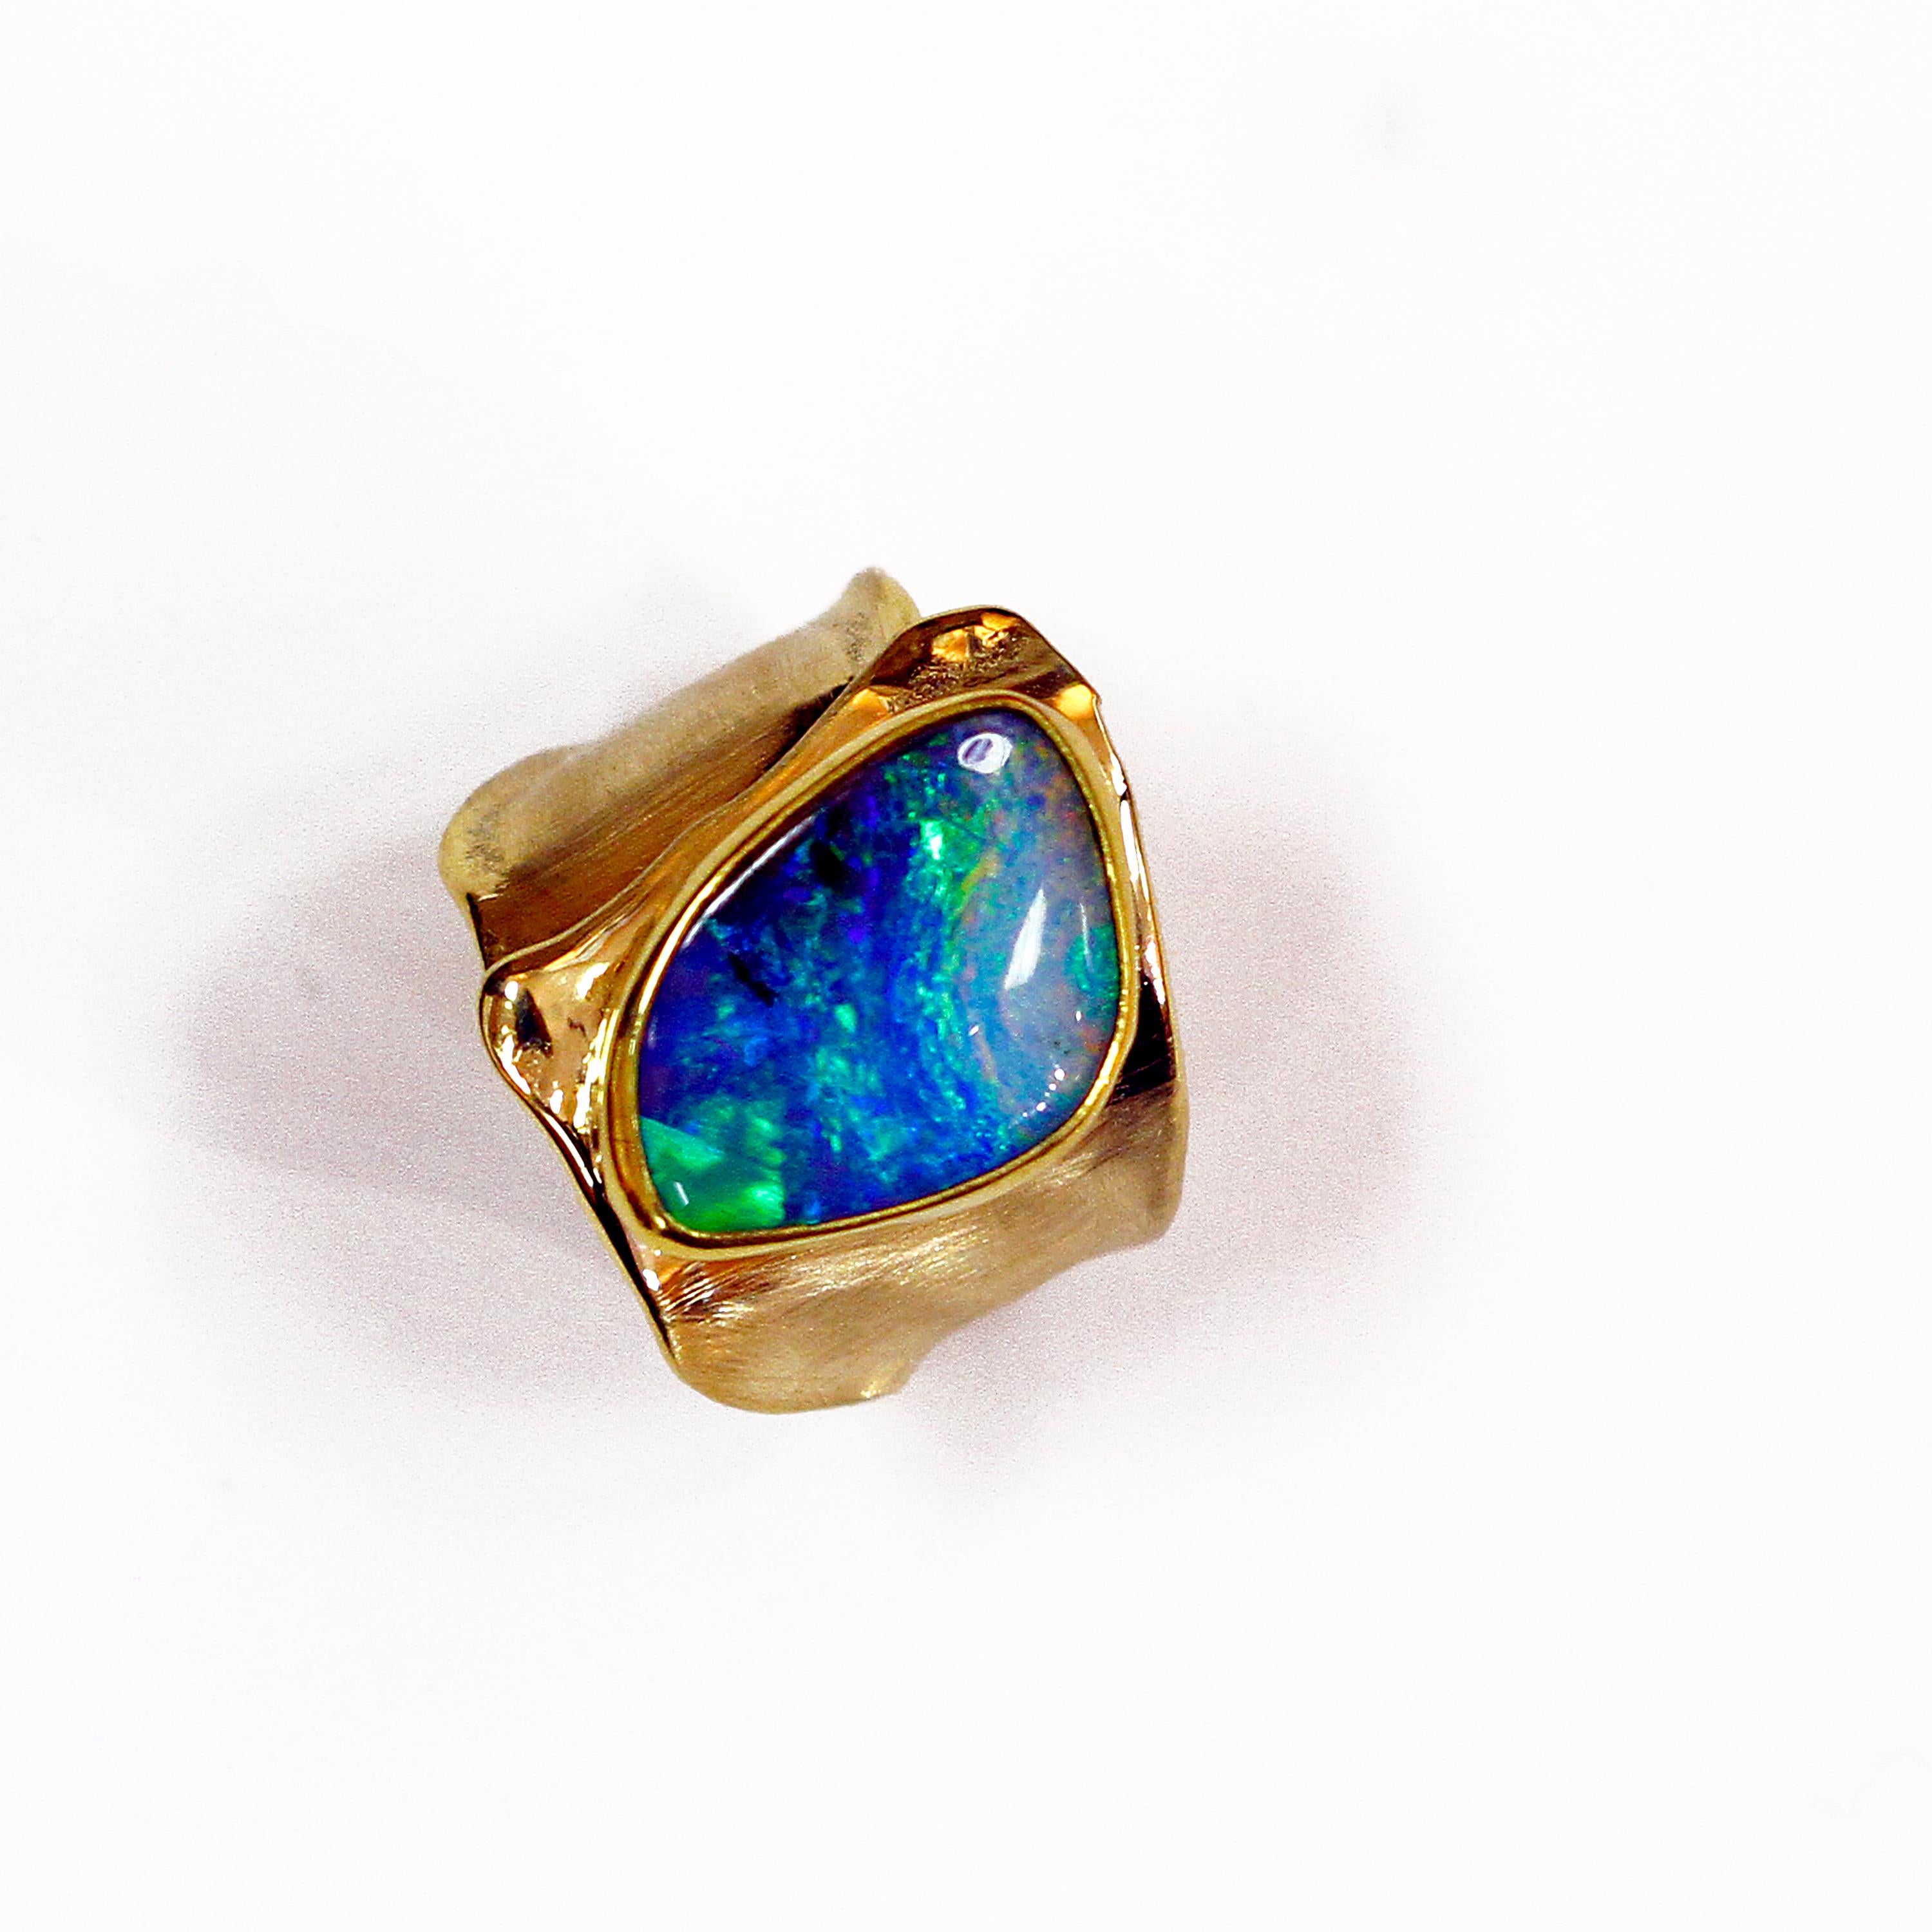 Every boulder opal is unique. The variety of color play in an opal is extraordinary. This boulder opal ring is bright with flash, and with every hue of blue, green and a brush stroke of pink! I have textured the 18k gold while leaving the gold edges